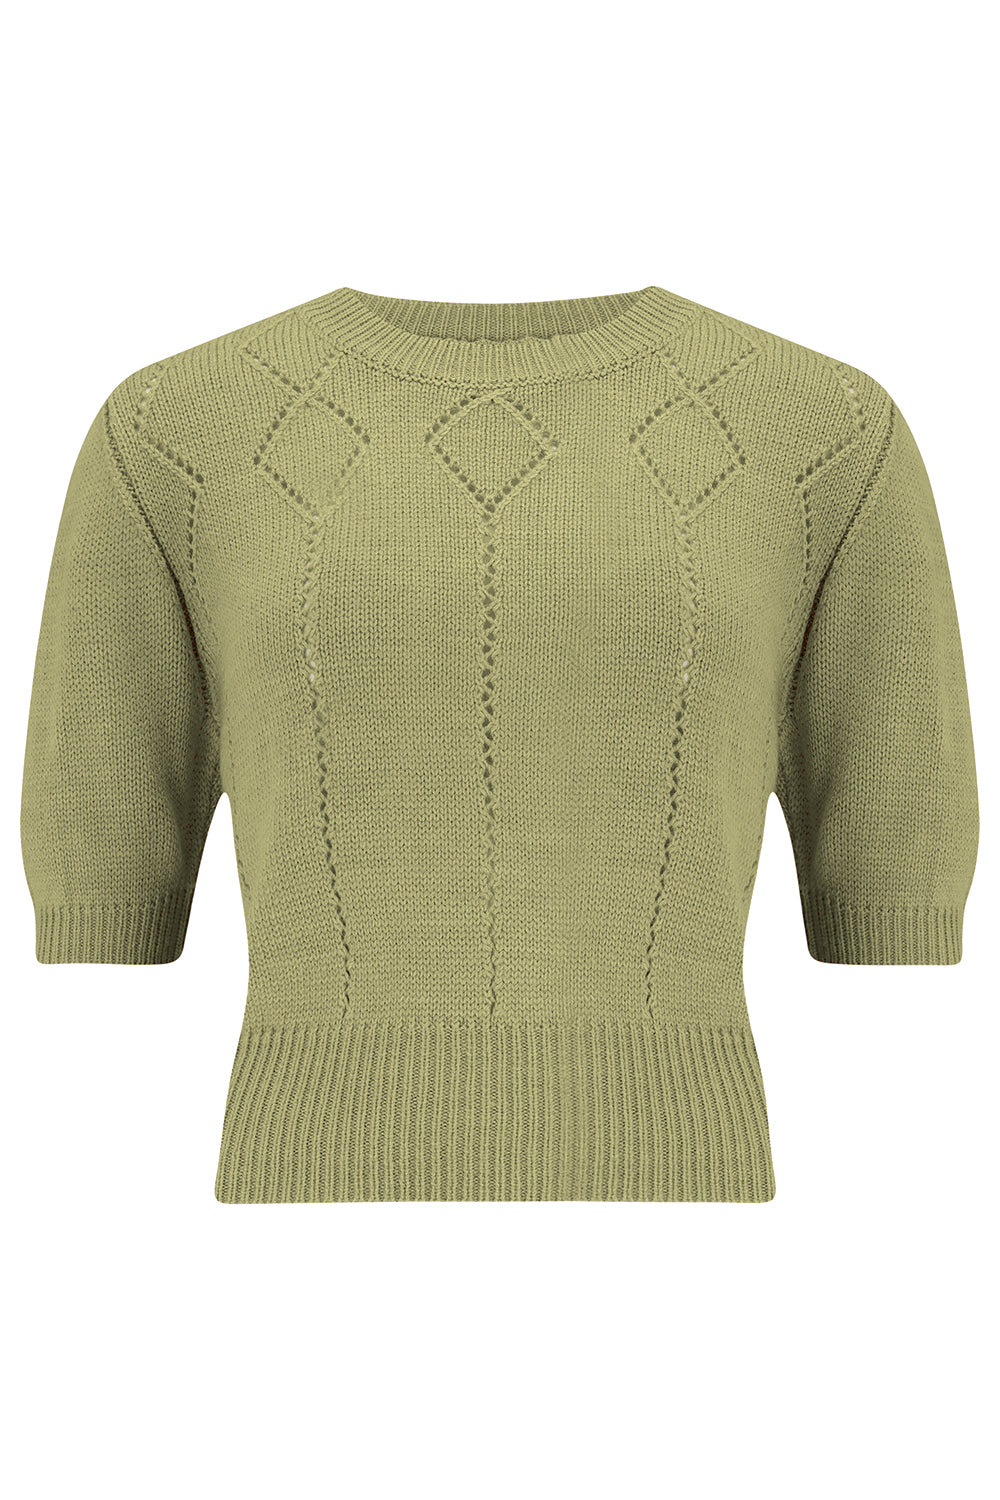 The "Frances" Short Sleeve Pullover Jumper in Sage Green, Classic 1940s & 50s Vintage Style